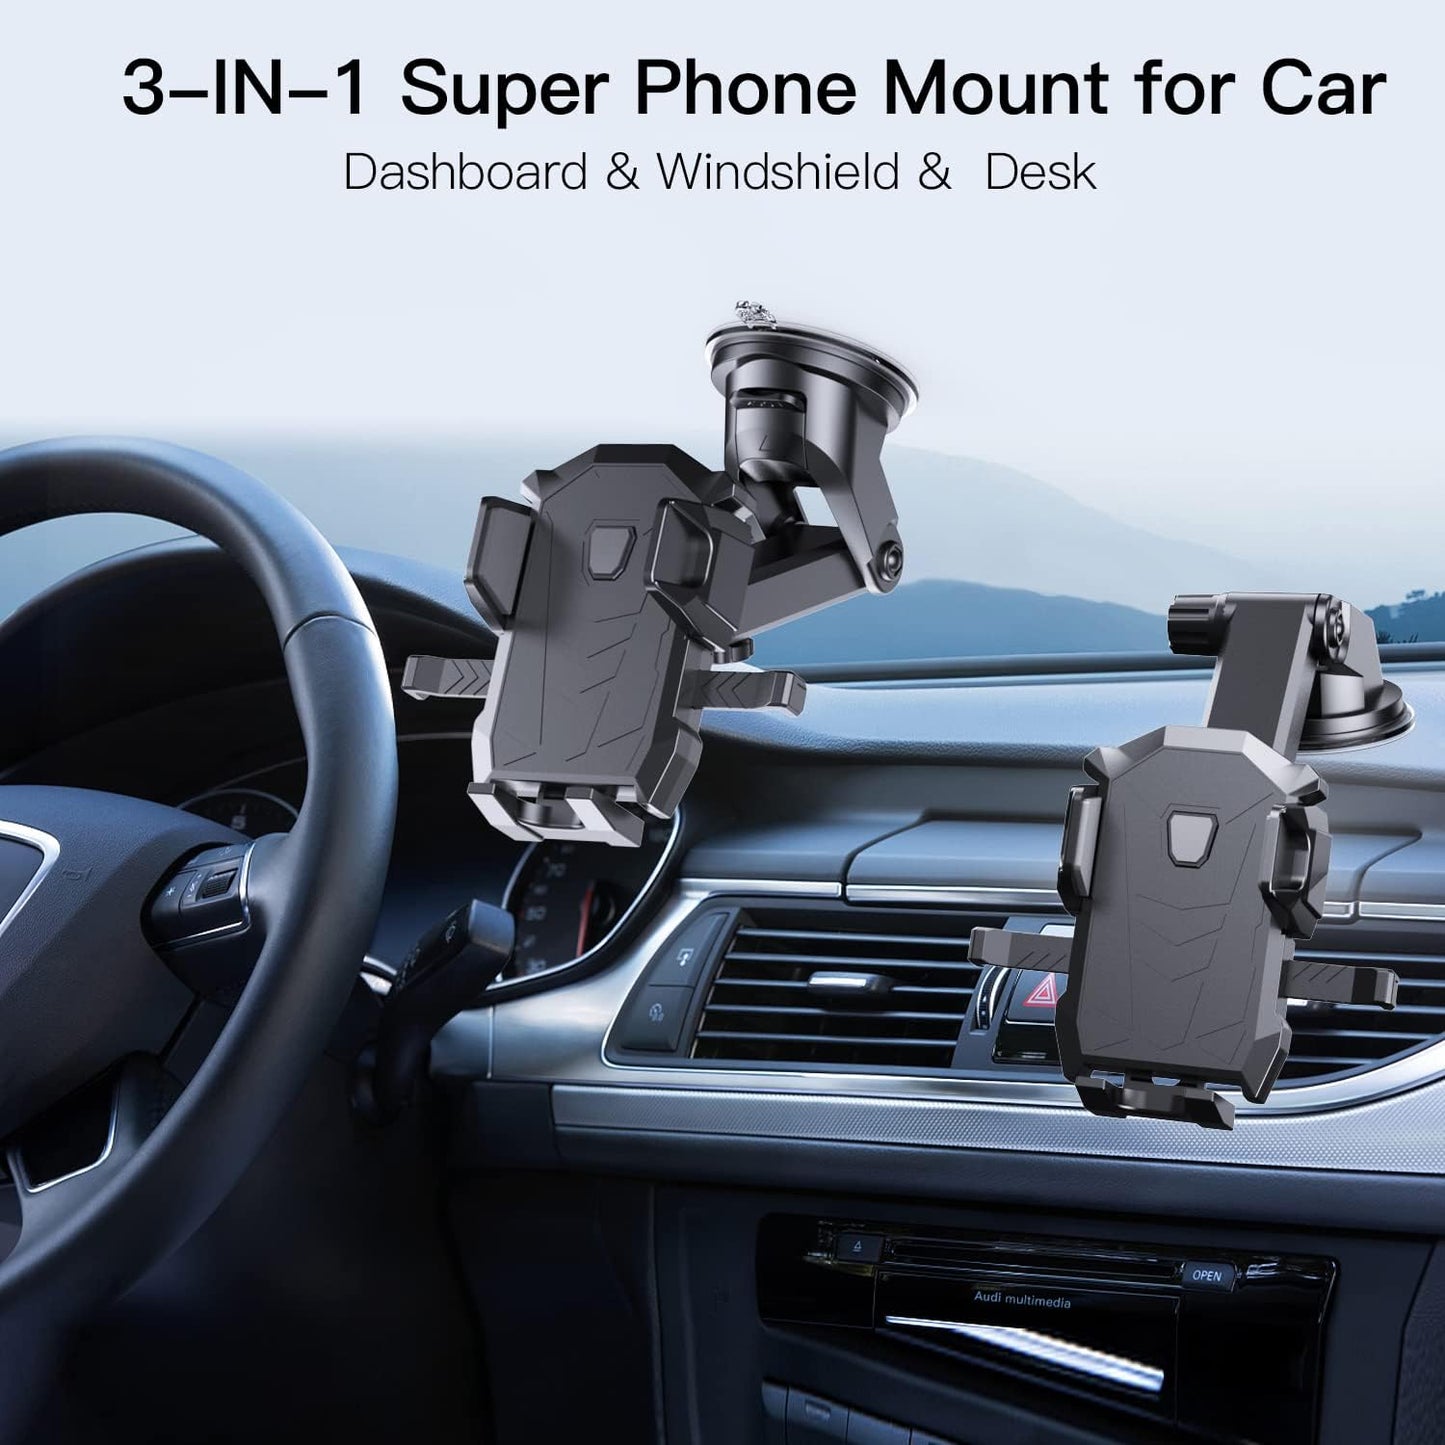 Phone Mount for Car Dashboard & Windshield Hands Free, Cell Phone Holder with Super Suction Cup and Long Arm